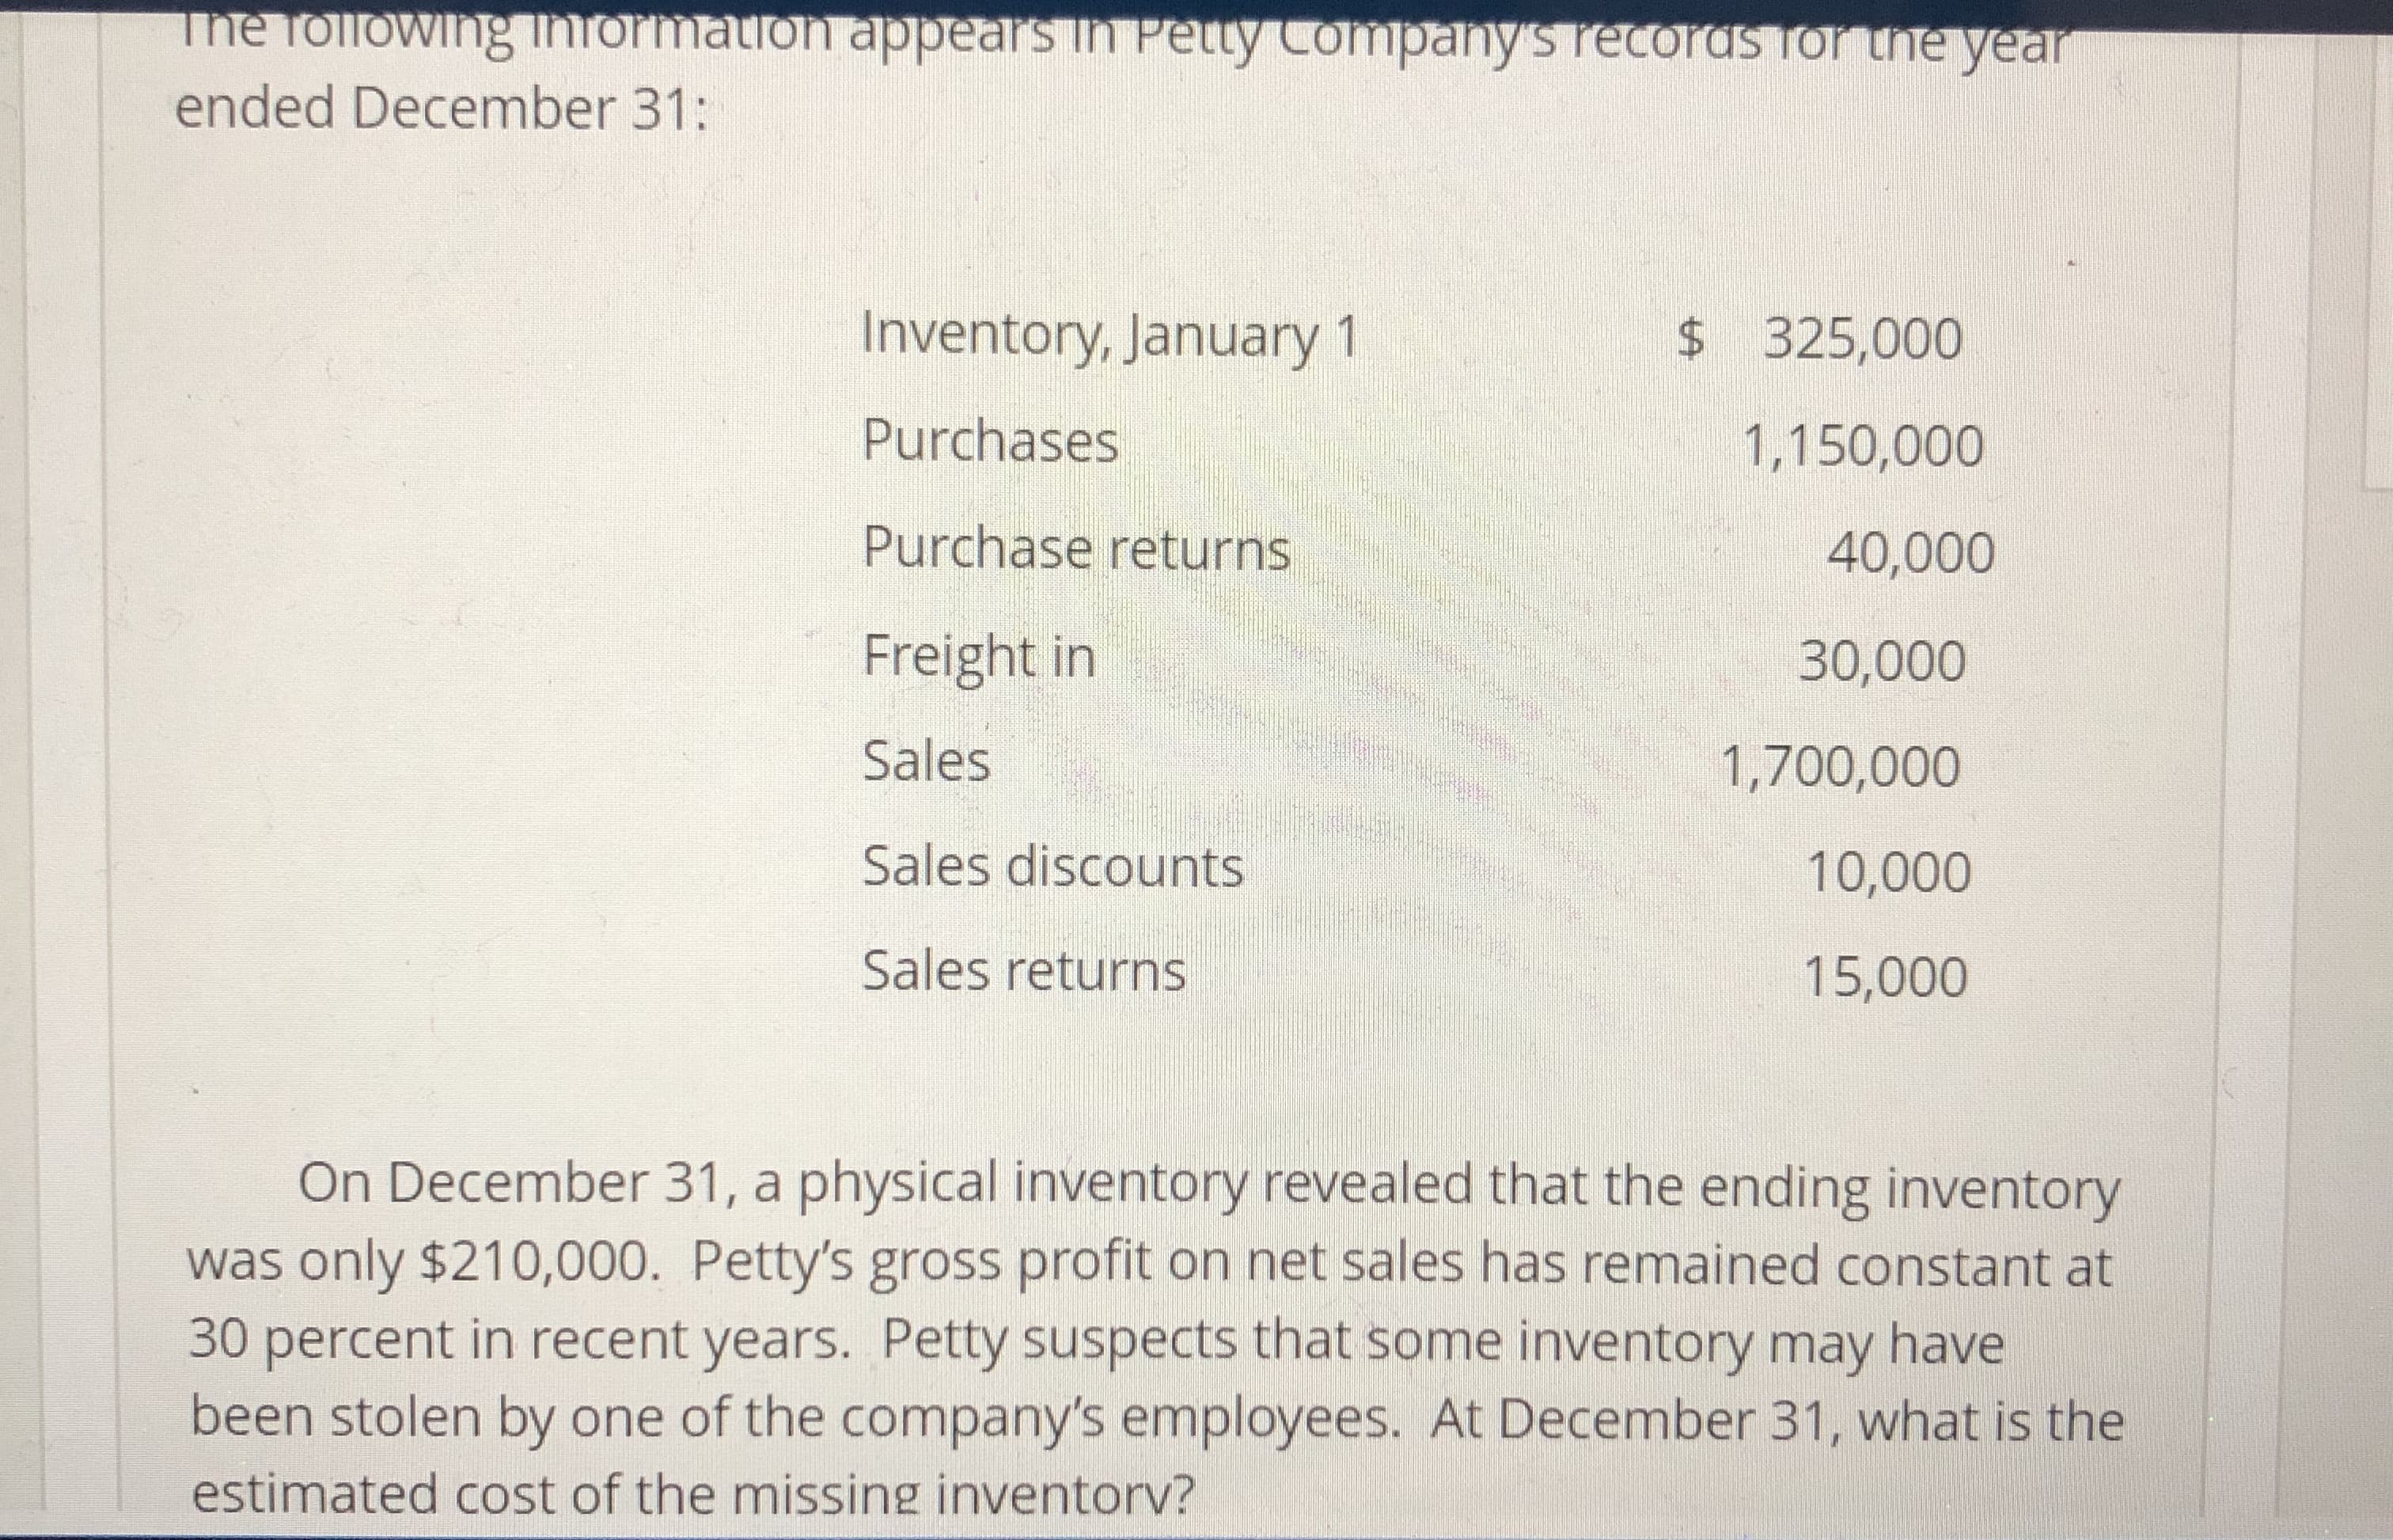 Ine Toirowing inormation appears in Pety Company s recoras for ue year
ended December 31:
Inventory, January 1
Purchases
Purchase returns
Freight in
Sales
Sales discounts
Sales returns
$325,000
1,150,000
40,000
30,000
1,700,000
10,000
15,000
On December 31, a physical inventory revealed that the ending inventory
was only $210,000. Petty's gross profit on net sales has remained constant at
30 percent in recent years. Petty suspects that some inventory may have
been stolen by one of the company's employees. At December 31, what is the
estimated cost of the missing inventorv?
